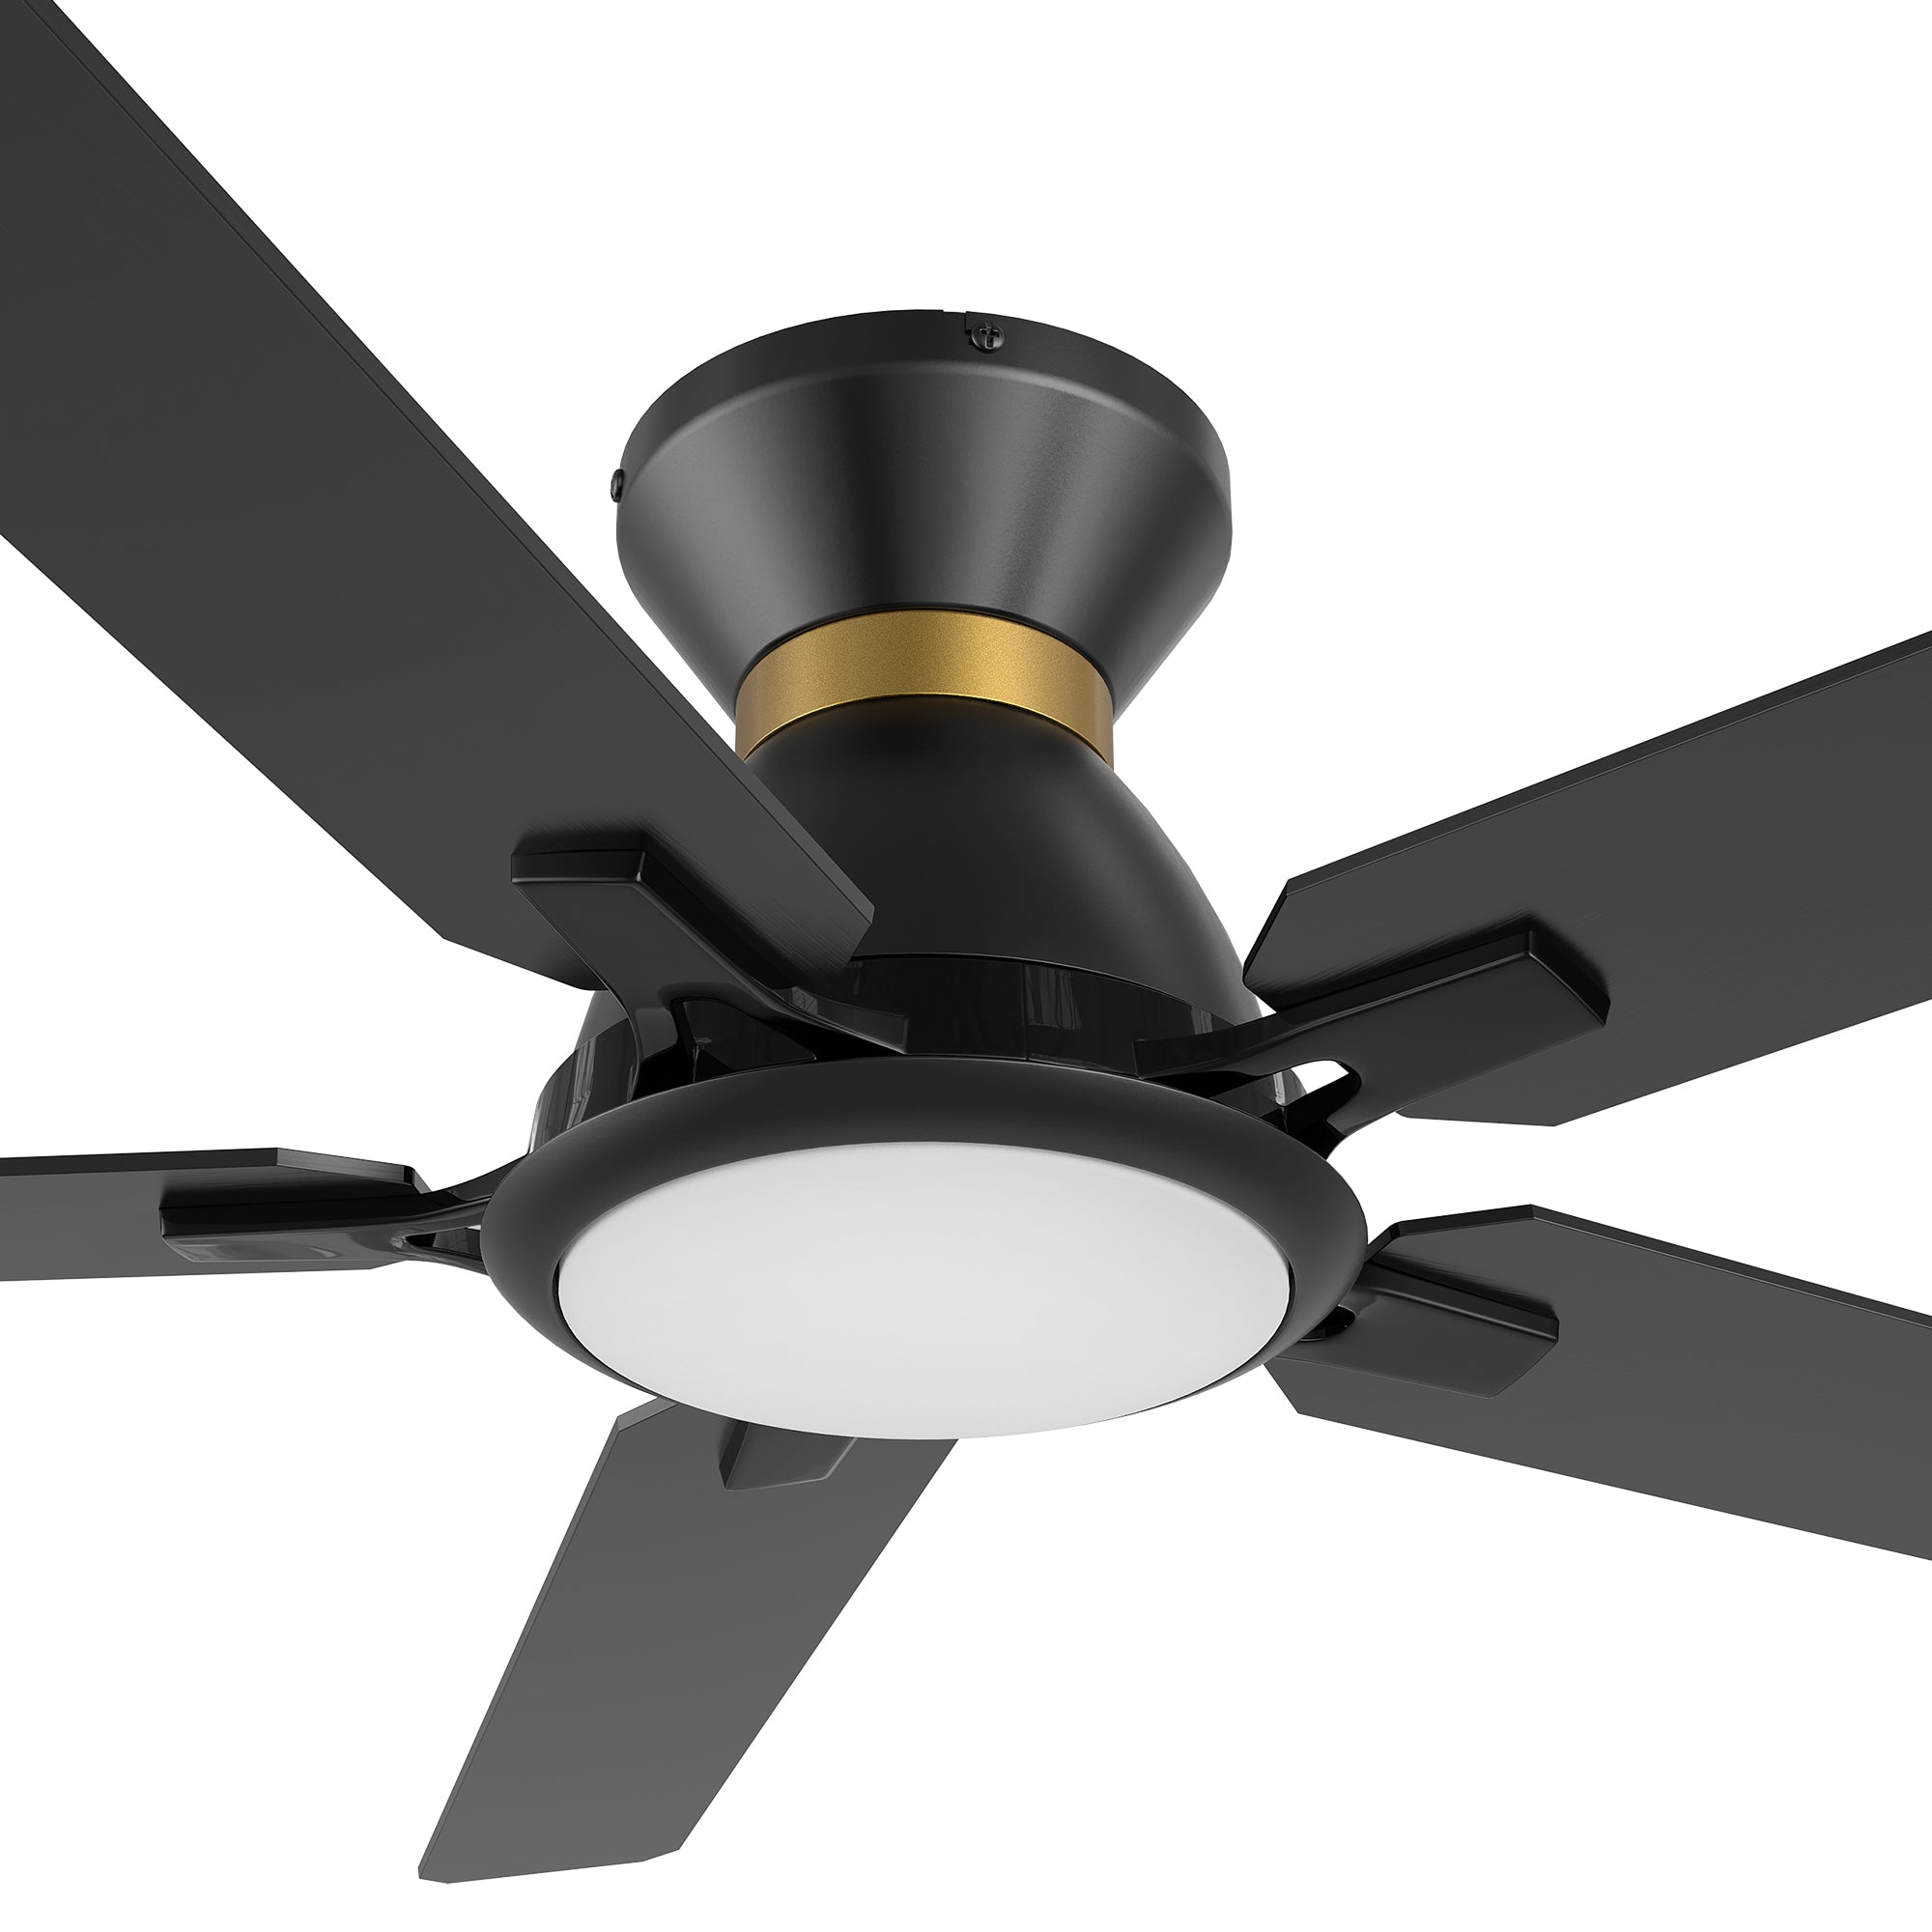 This Essex 52&#39;&#39; smart ceiling fan keeps your space cool, bright, and stylish. It is a soft modern masterpiece perfect for your large indoor living spaces. This Wifi smart ceiling fan is a simplicity designing with Black finish, use elegant Plywood blades and has an integrated 4000K LED cool light. The fan features Remote control, Wi-Fi apps, Siri Shortcut and Voice control technology (compatible with Amazon Alexa and Google Home Assistant ) to set fan preferences.